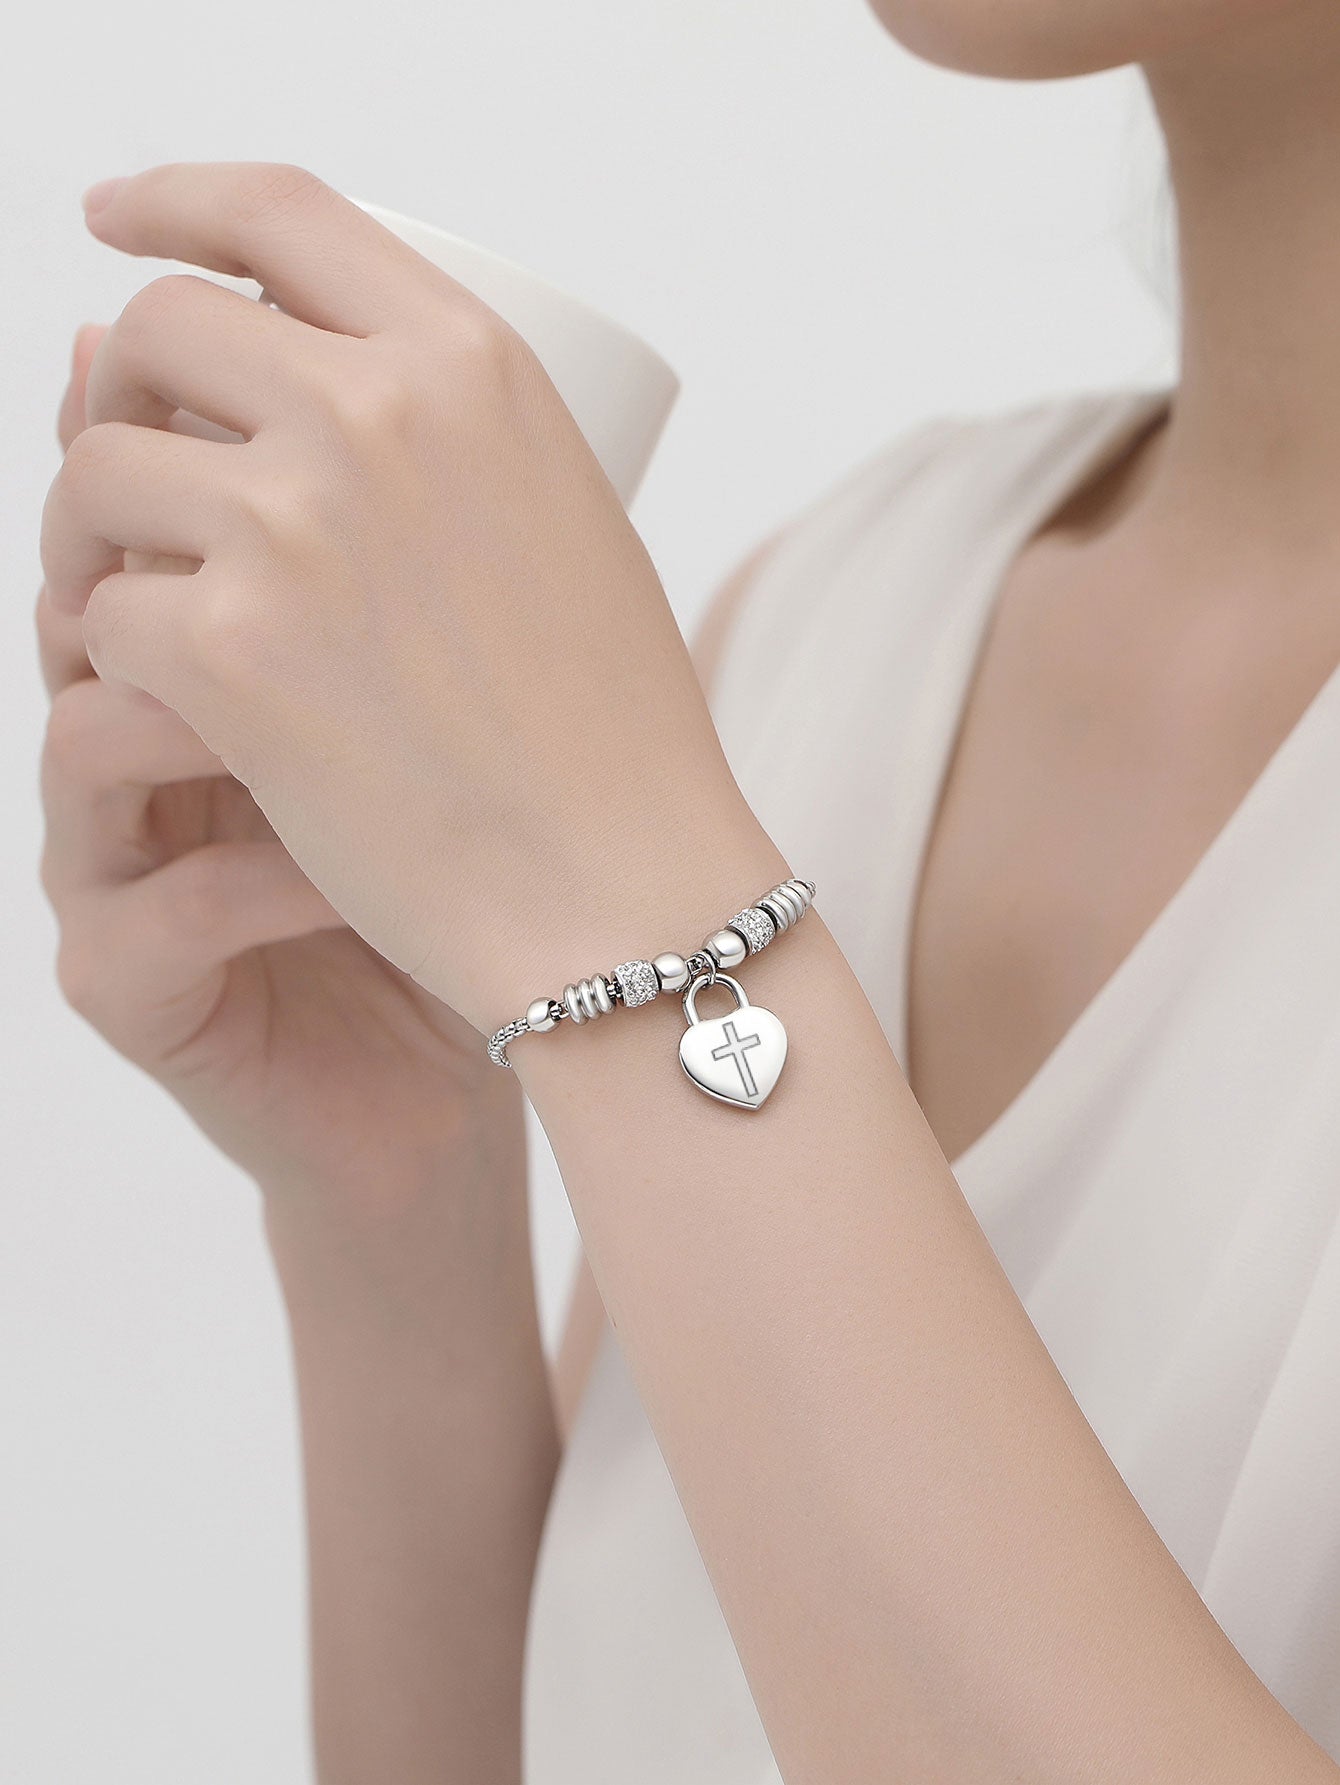 Stainless Steel Heart Bracelet - A Meaningful Gift for Women, Perfect for Christmas and New Year's Celebrations